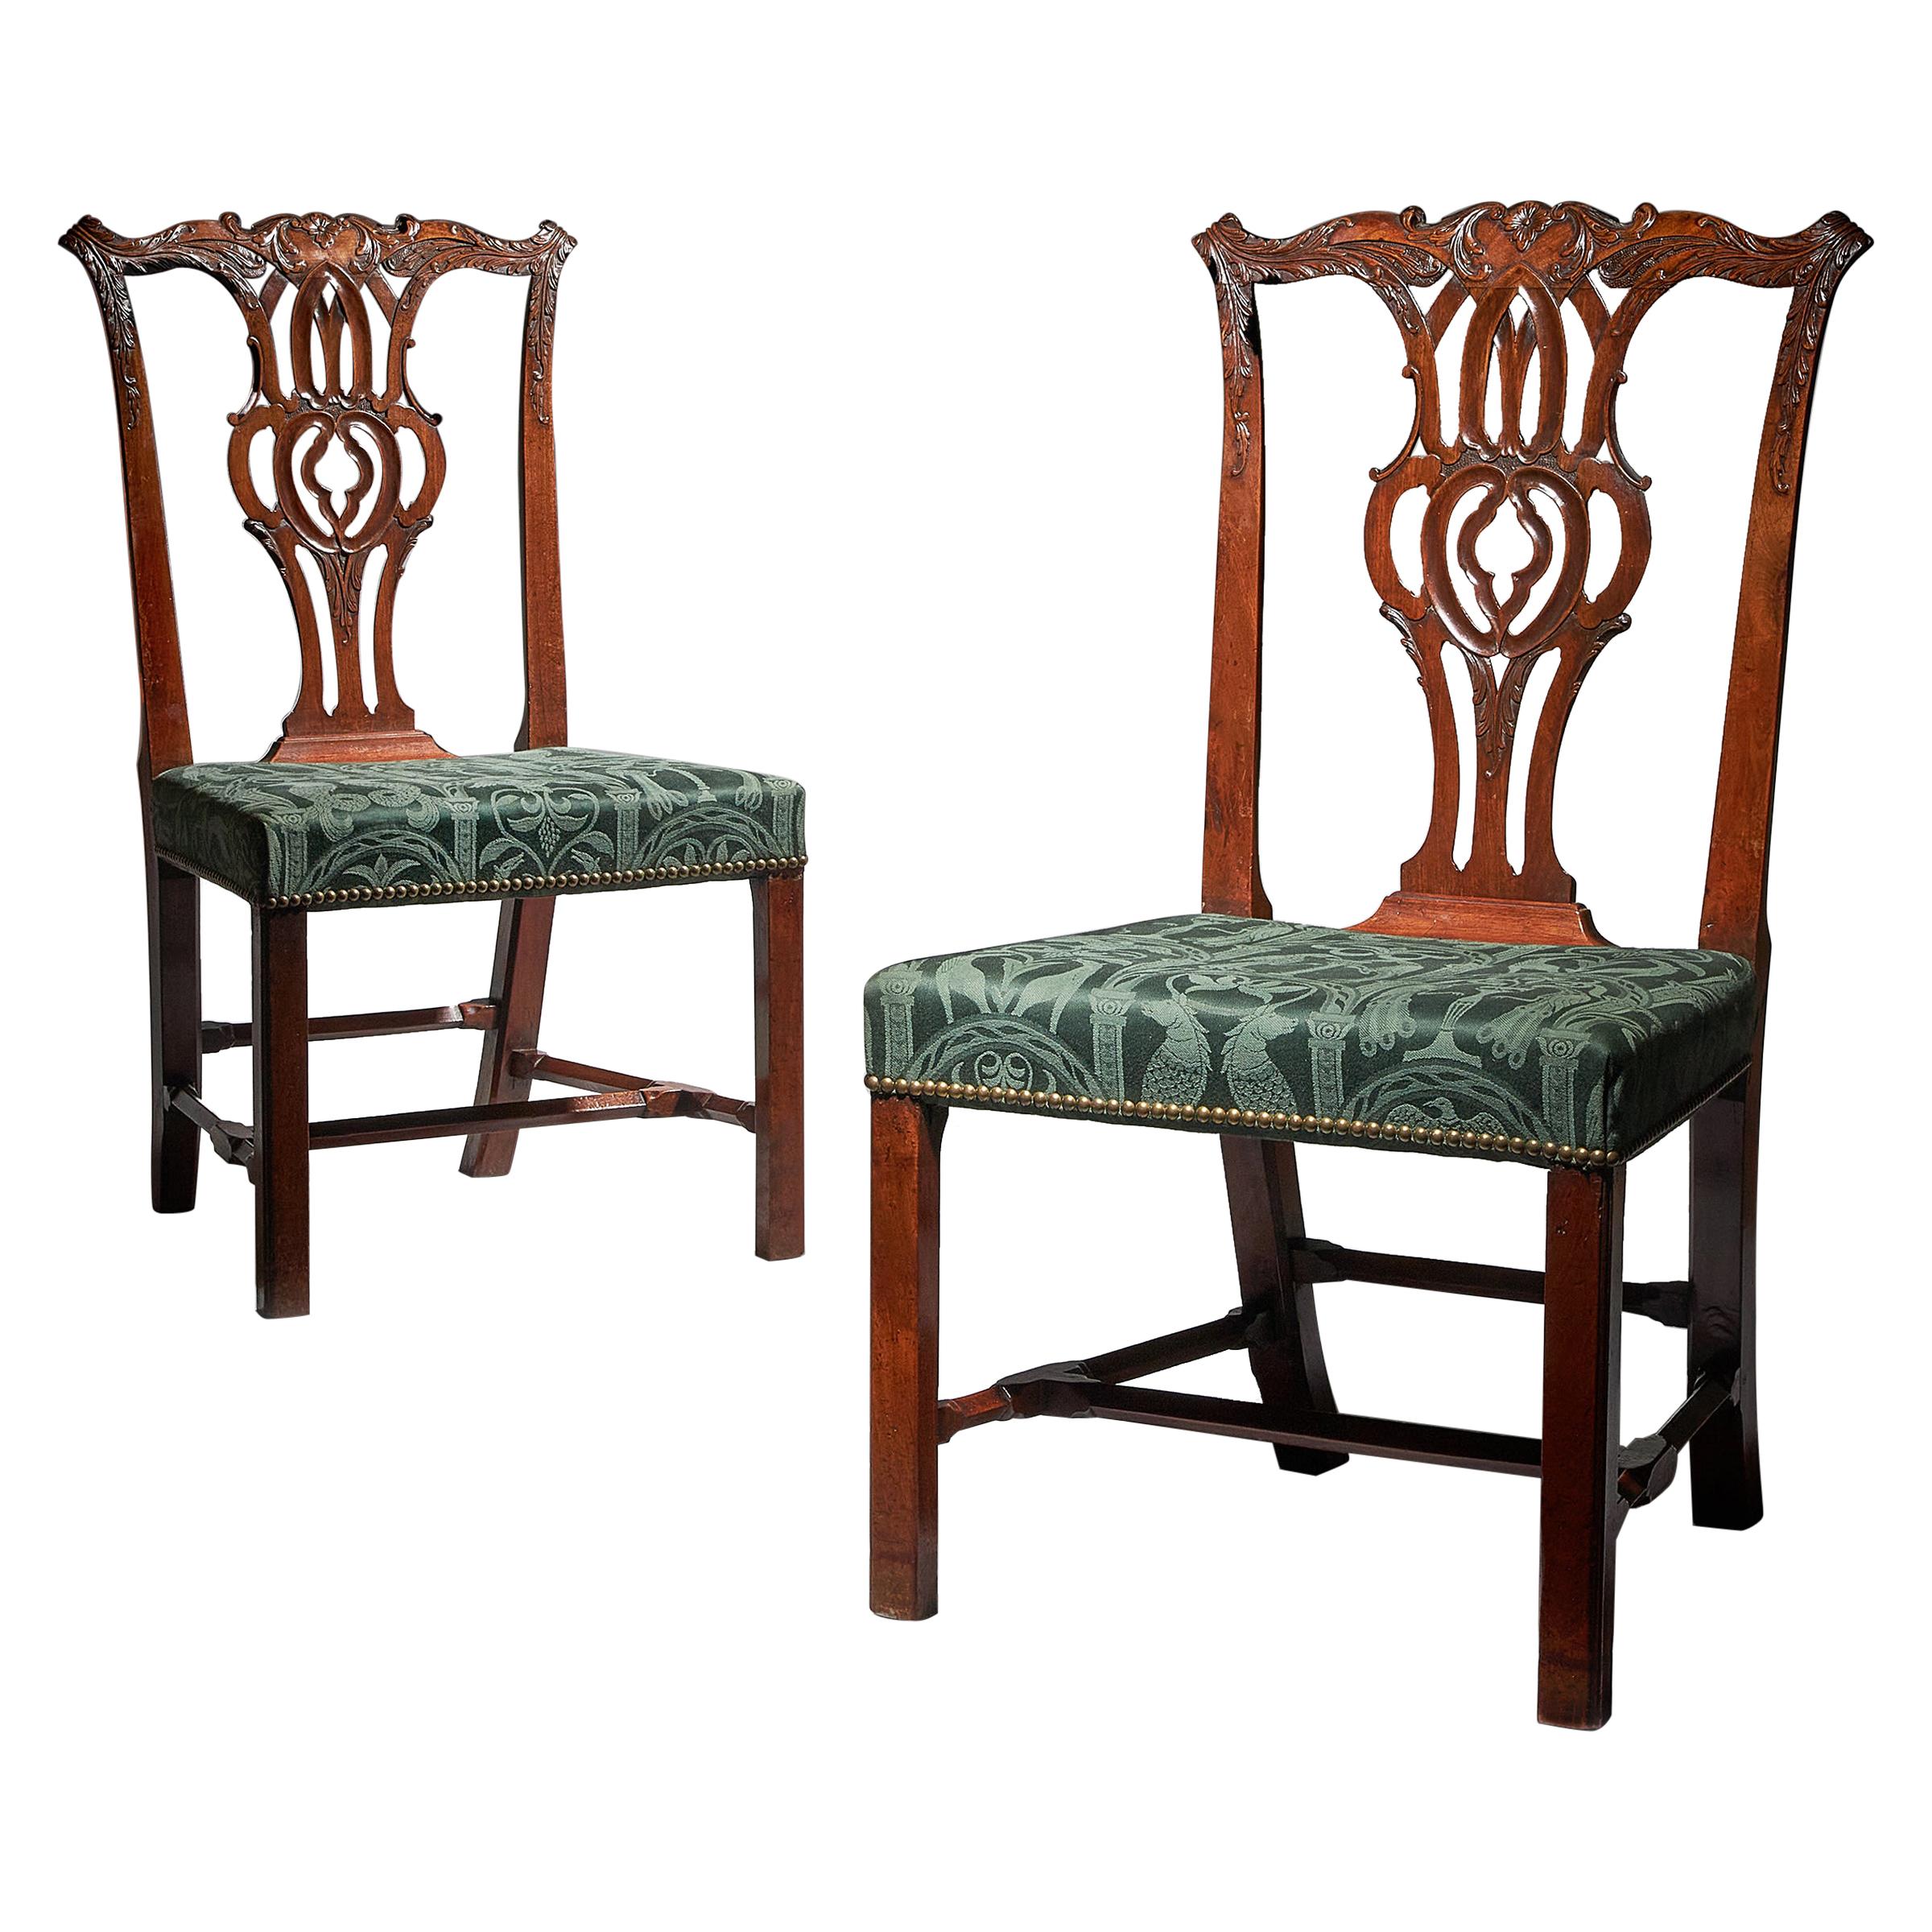 Pair of 18th Century George III Carved Mahogany Chippendale Chairs